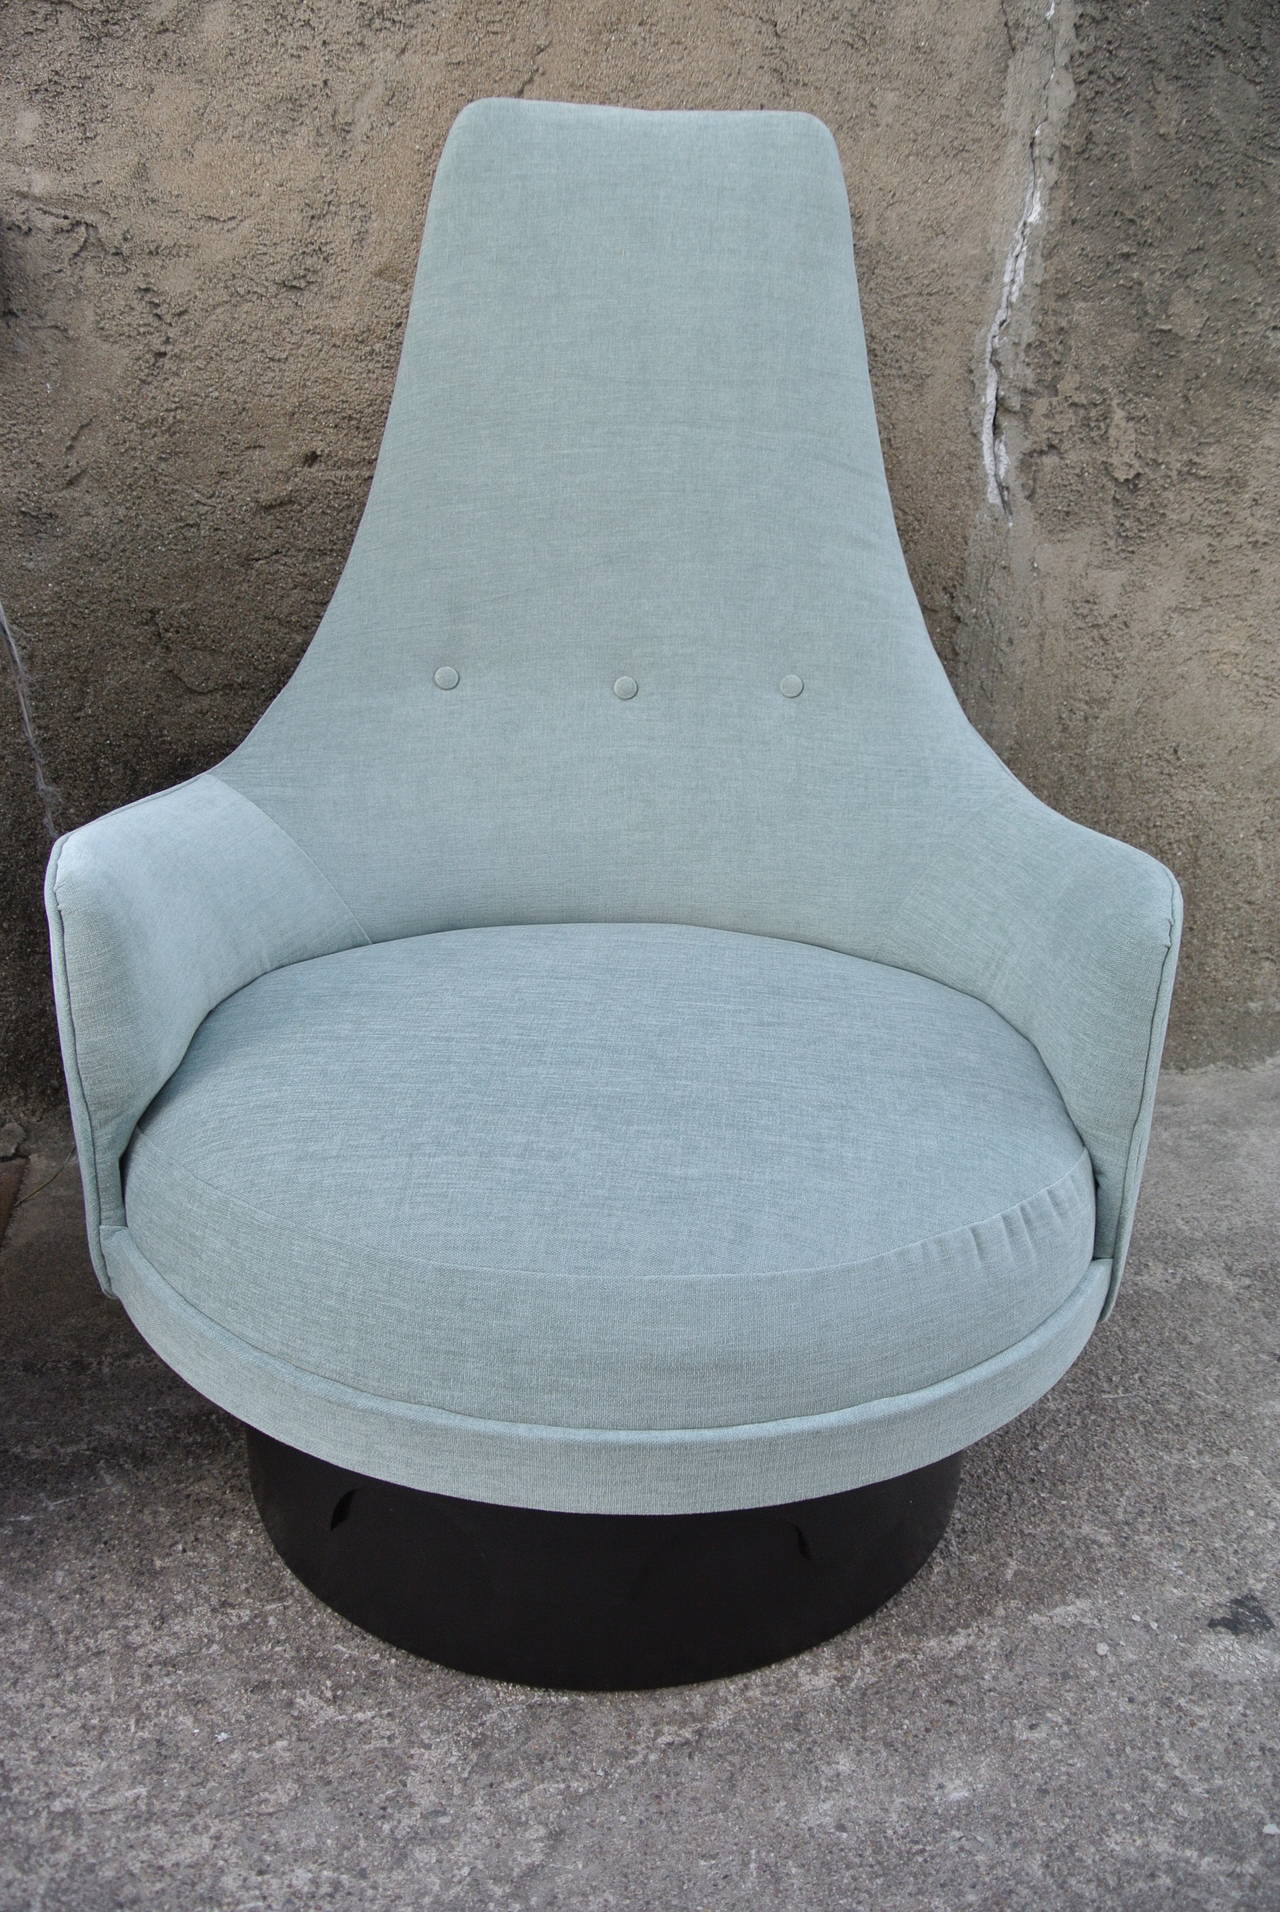 Upholstery Adrian Pearsall High Back Barrel Chairs